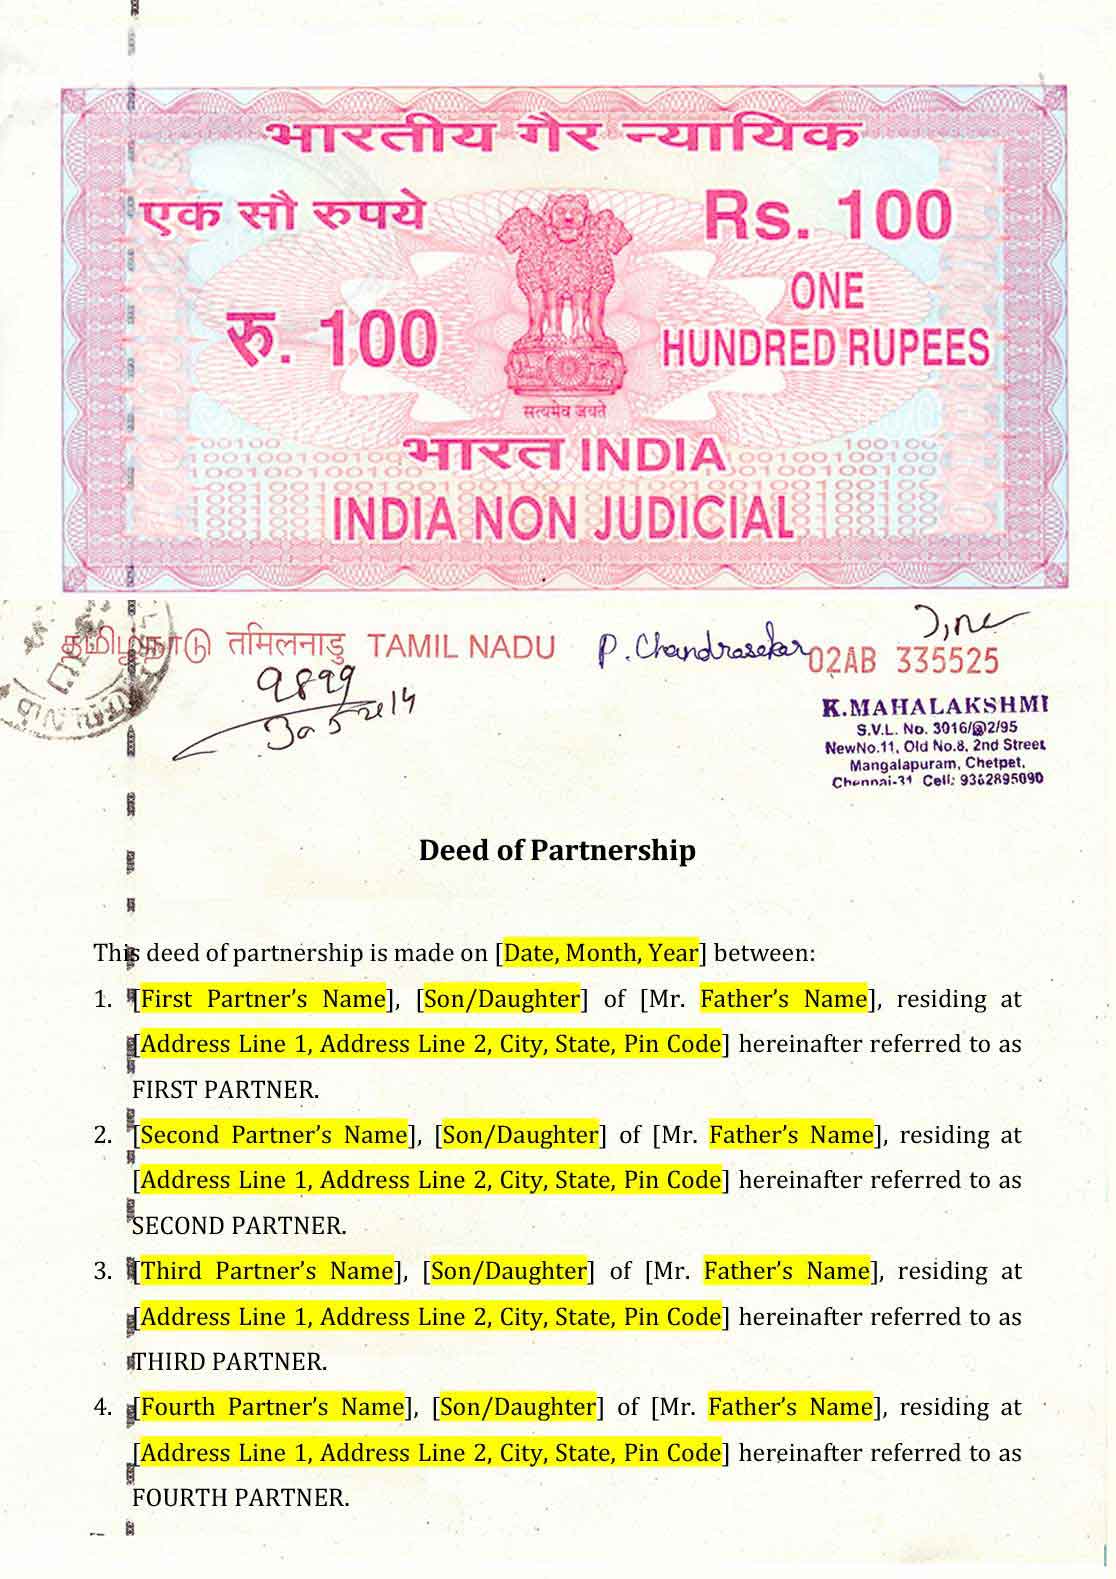 Partnership Deed format in India